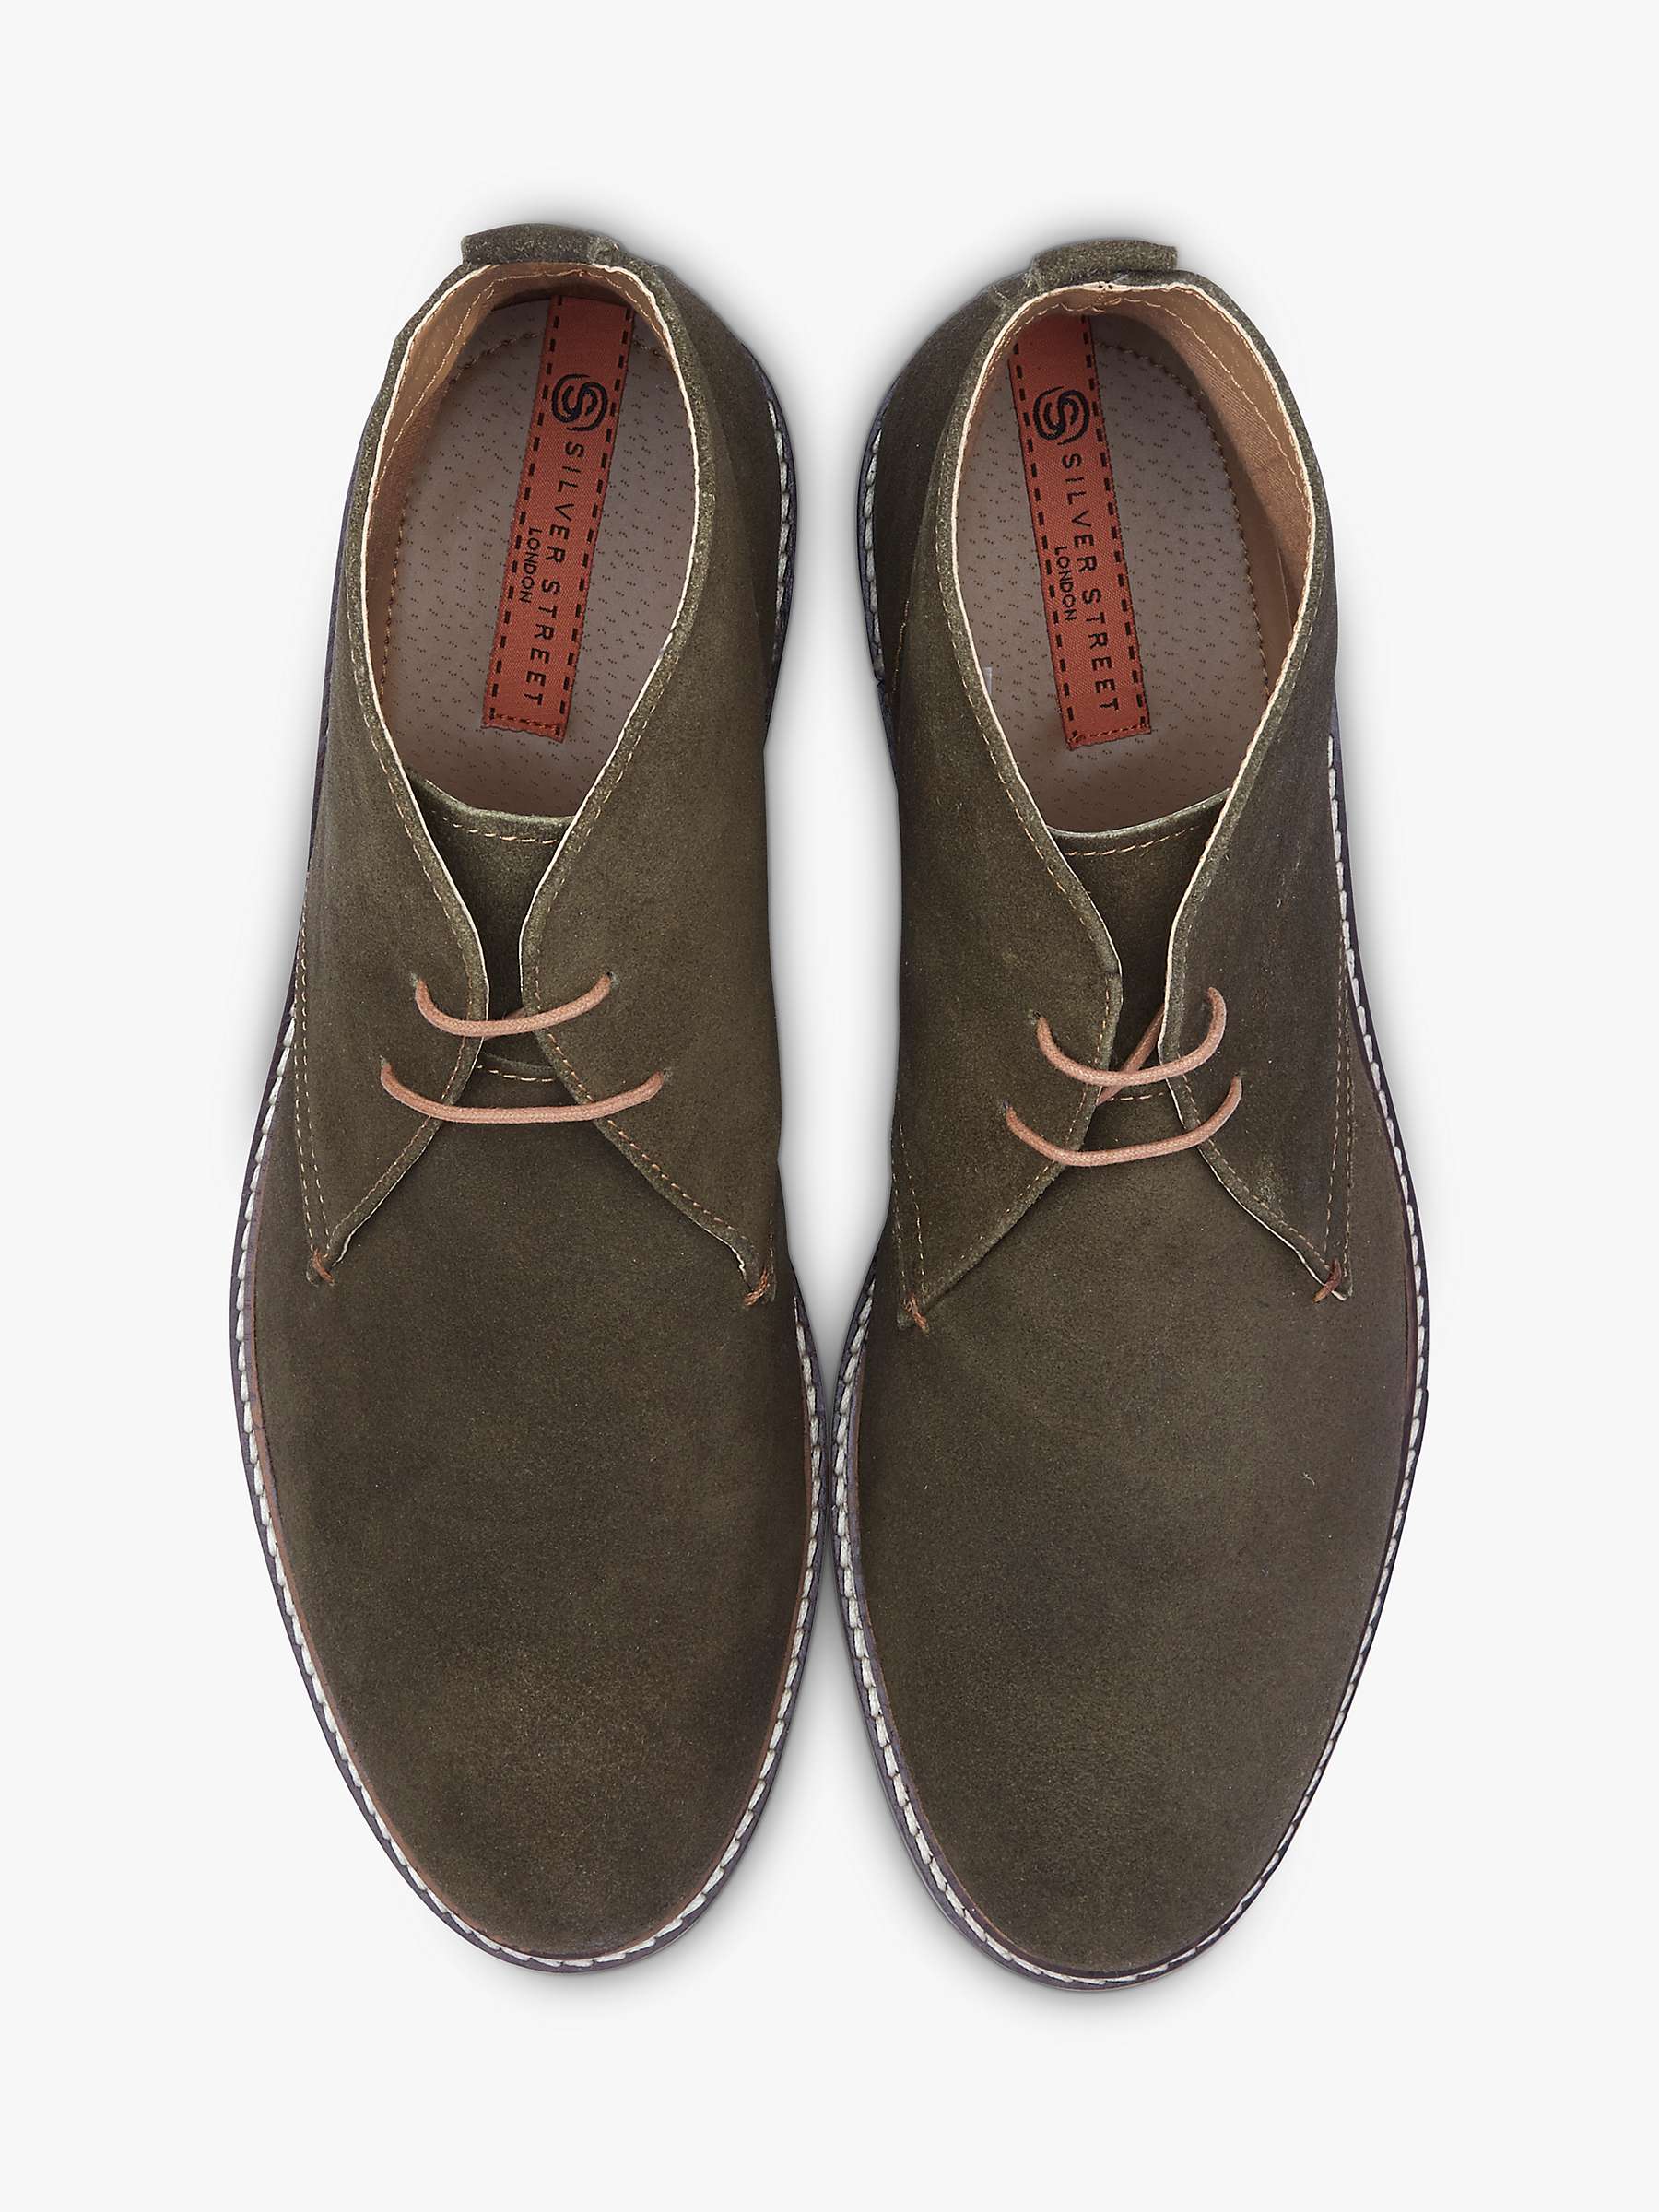 Buy Silver Street London Wicked Suede Chukka Boots Online at johnlewis.com